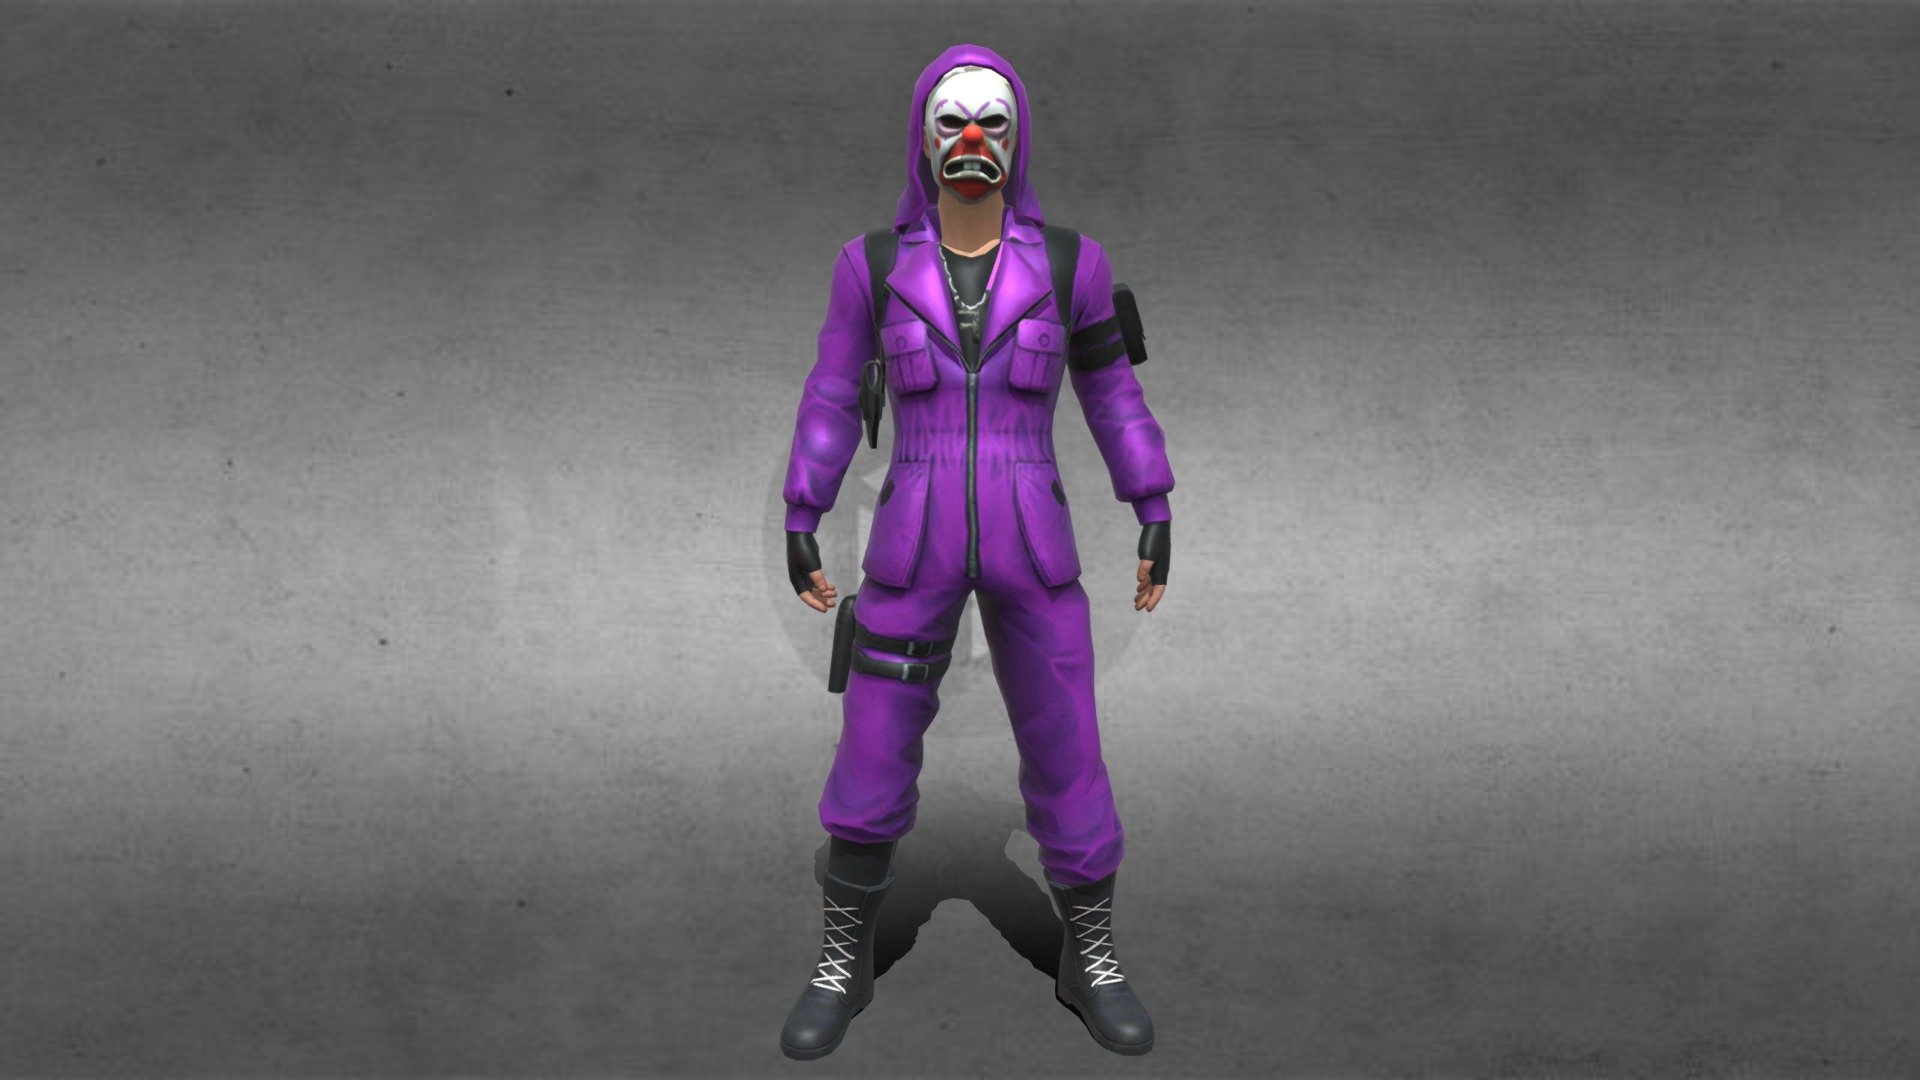 Hello frnds i am M.Rahaman. Here your free 3d model. you can use it free. you can visit my YT Channel BROKIE FF. Subscribe my channel for more
Channel Link : https://www.youtube.com/channel/UCPDQPvc8sFLx5B1qX2oSBMA - Purple Criminal_Free Fire - 3D model by BrOkiE FF (@mafujarrahaman123) 3d model